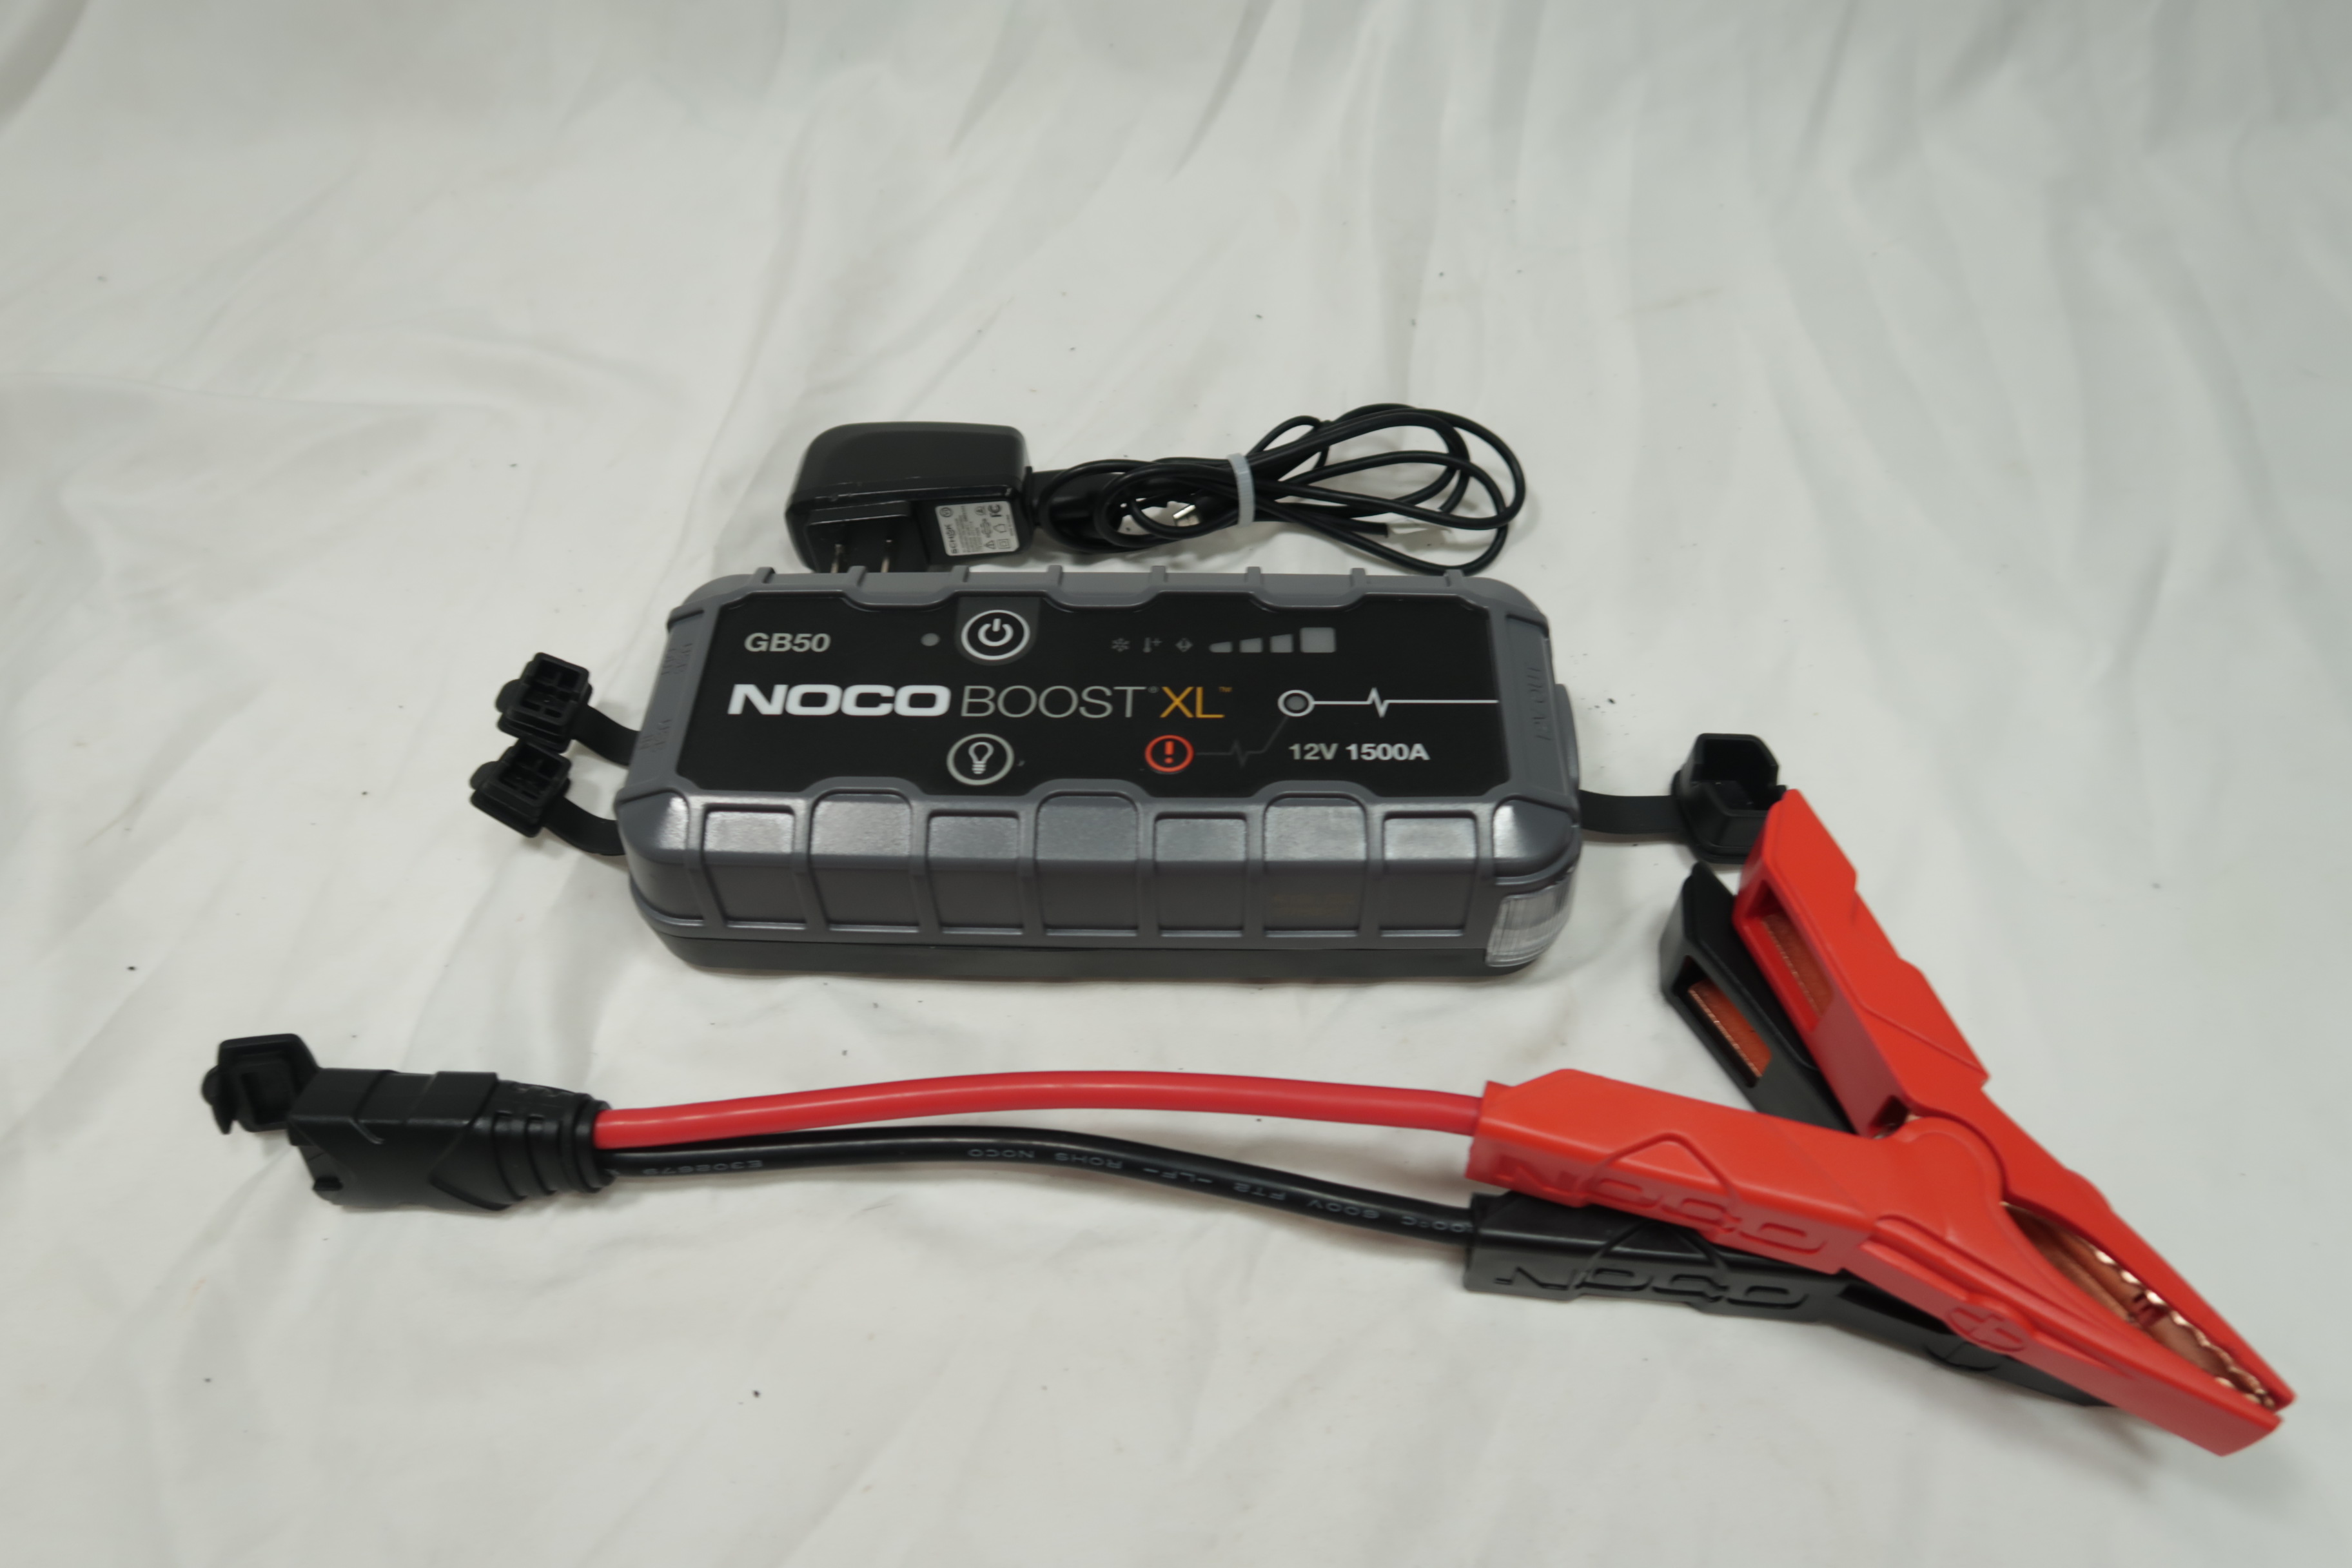 Noco Boost XL GB50 1500 Amp 12V Jump Starter Power Bank Charger Jumper  Cables